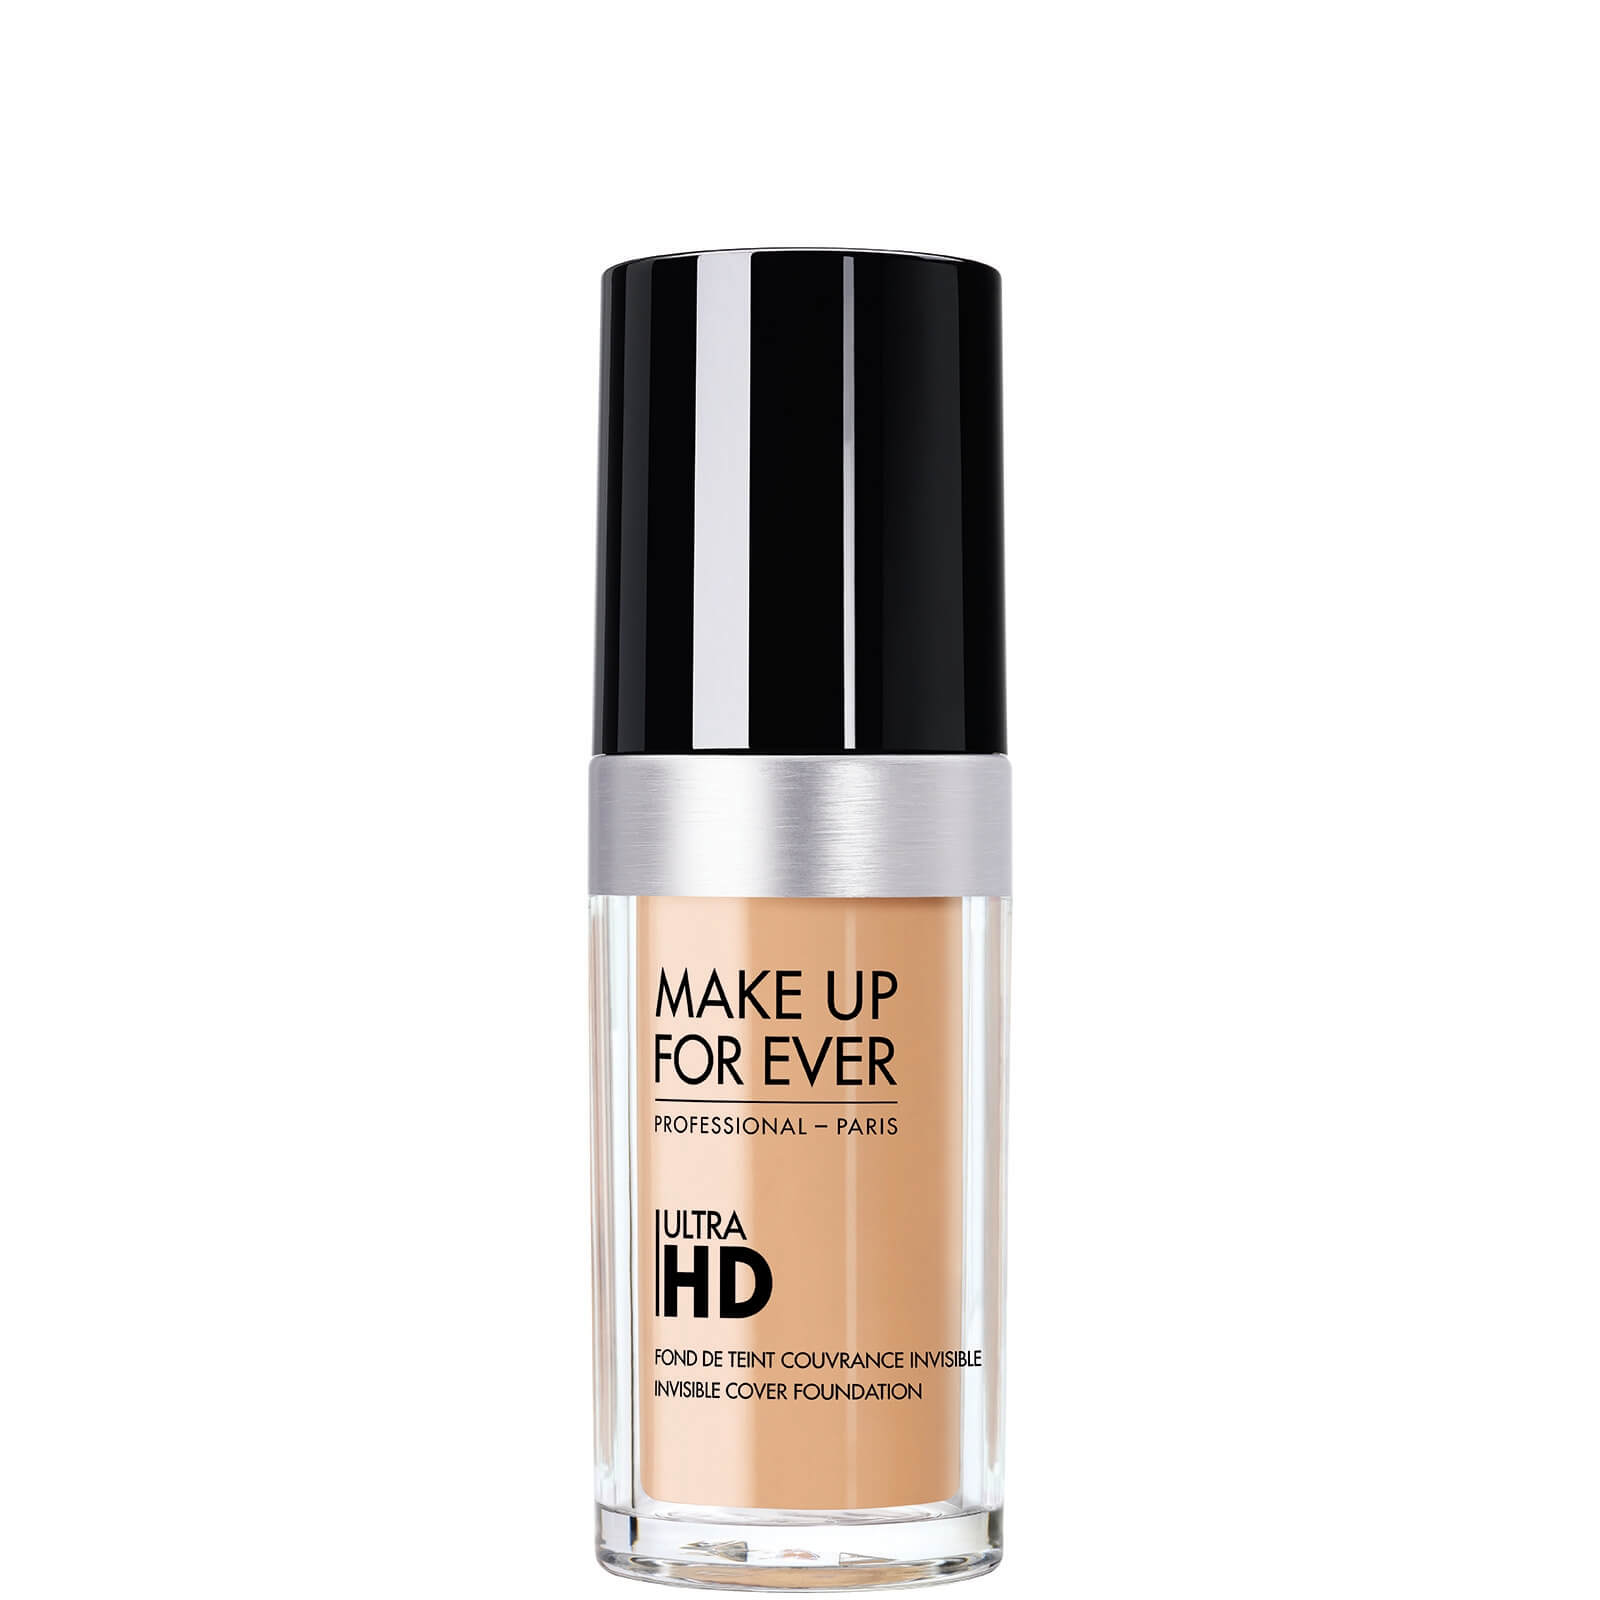 MAKE UP FOR EVER ultra Hd Invisible Cover Foundation 30ml (Various Shades) - - R330 Dark Ivory